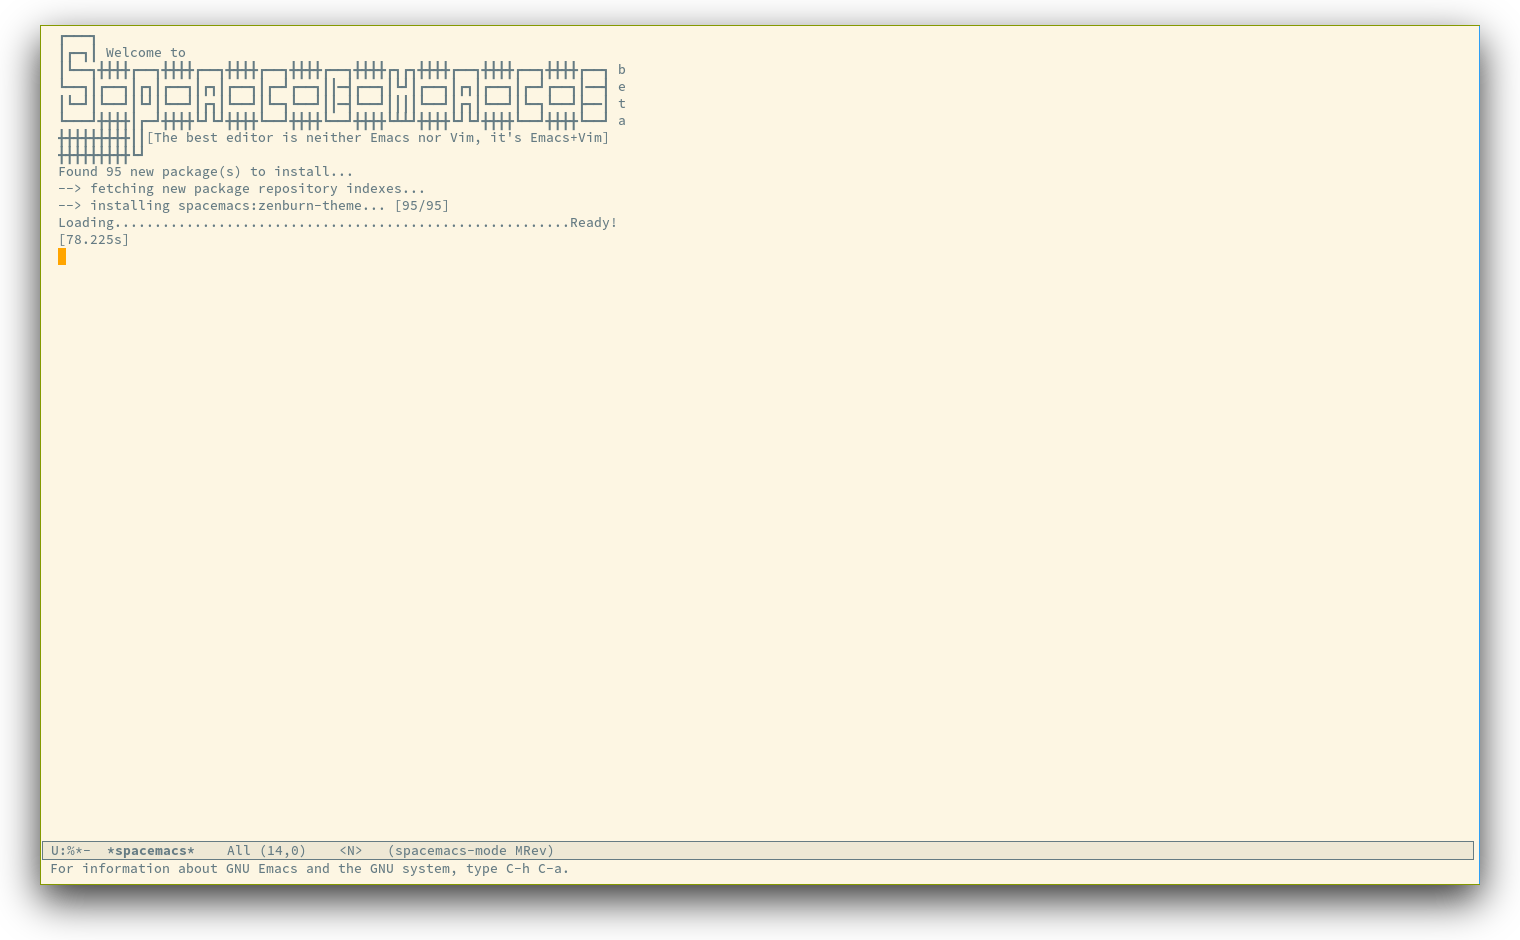 /TakeV/spacemacs/media/commit/812d35a100df6dae03a07cd1cb5a9dba1ff5757c/doc/img/spacemacs-startup.png